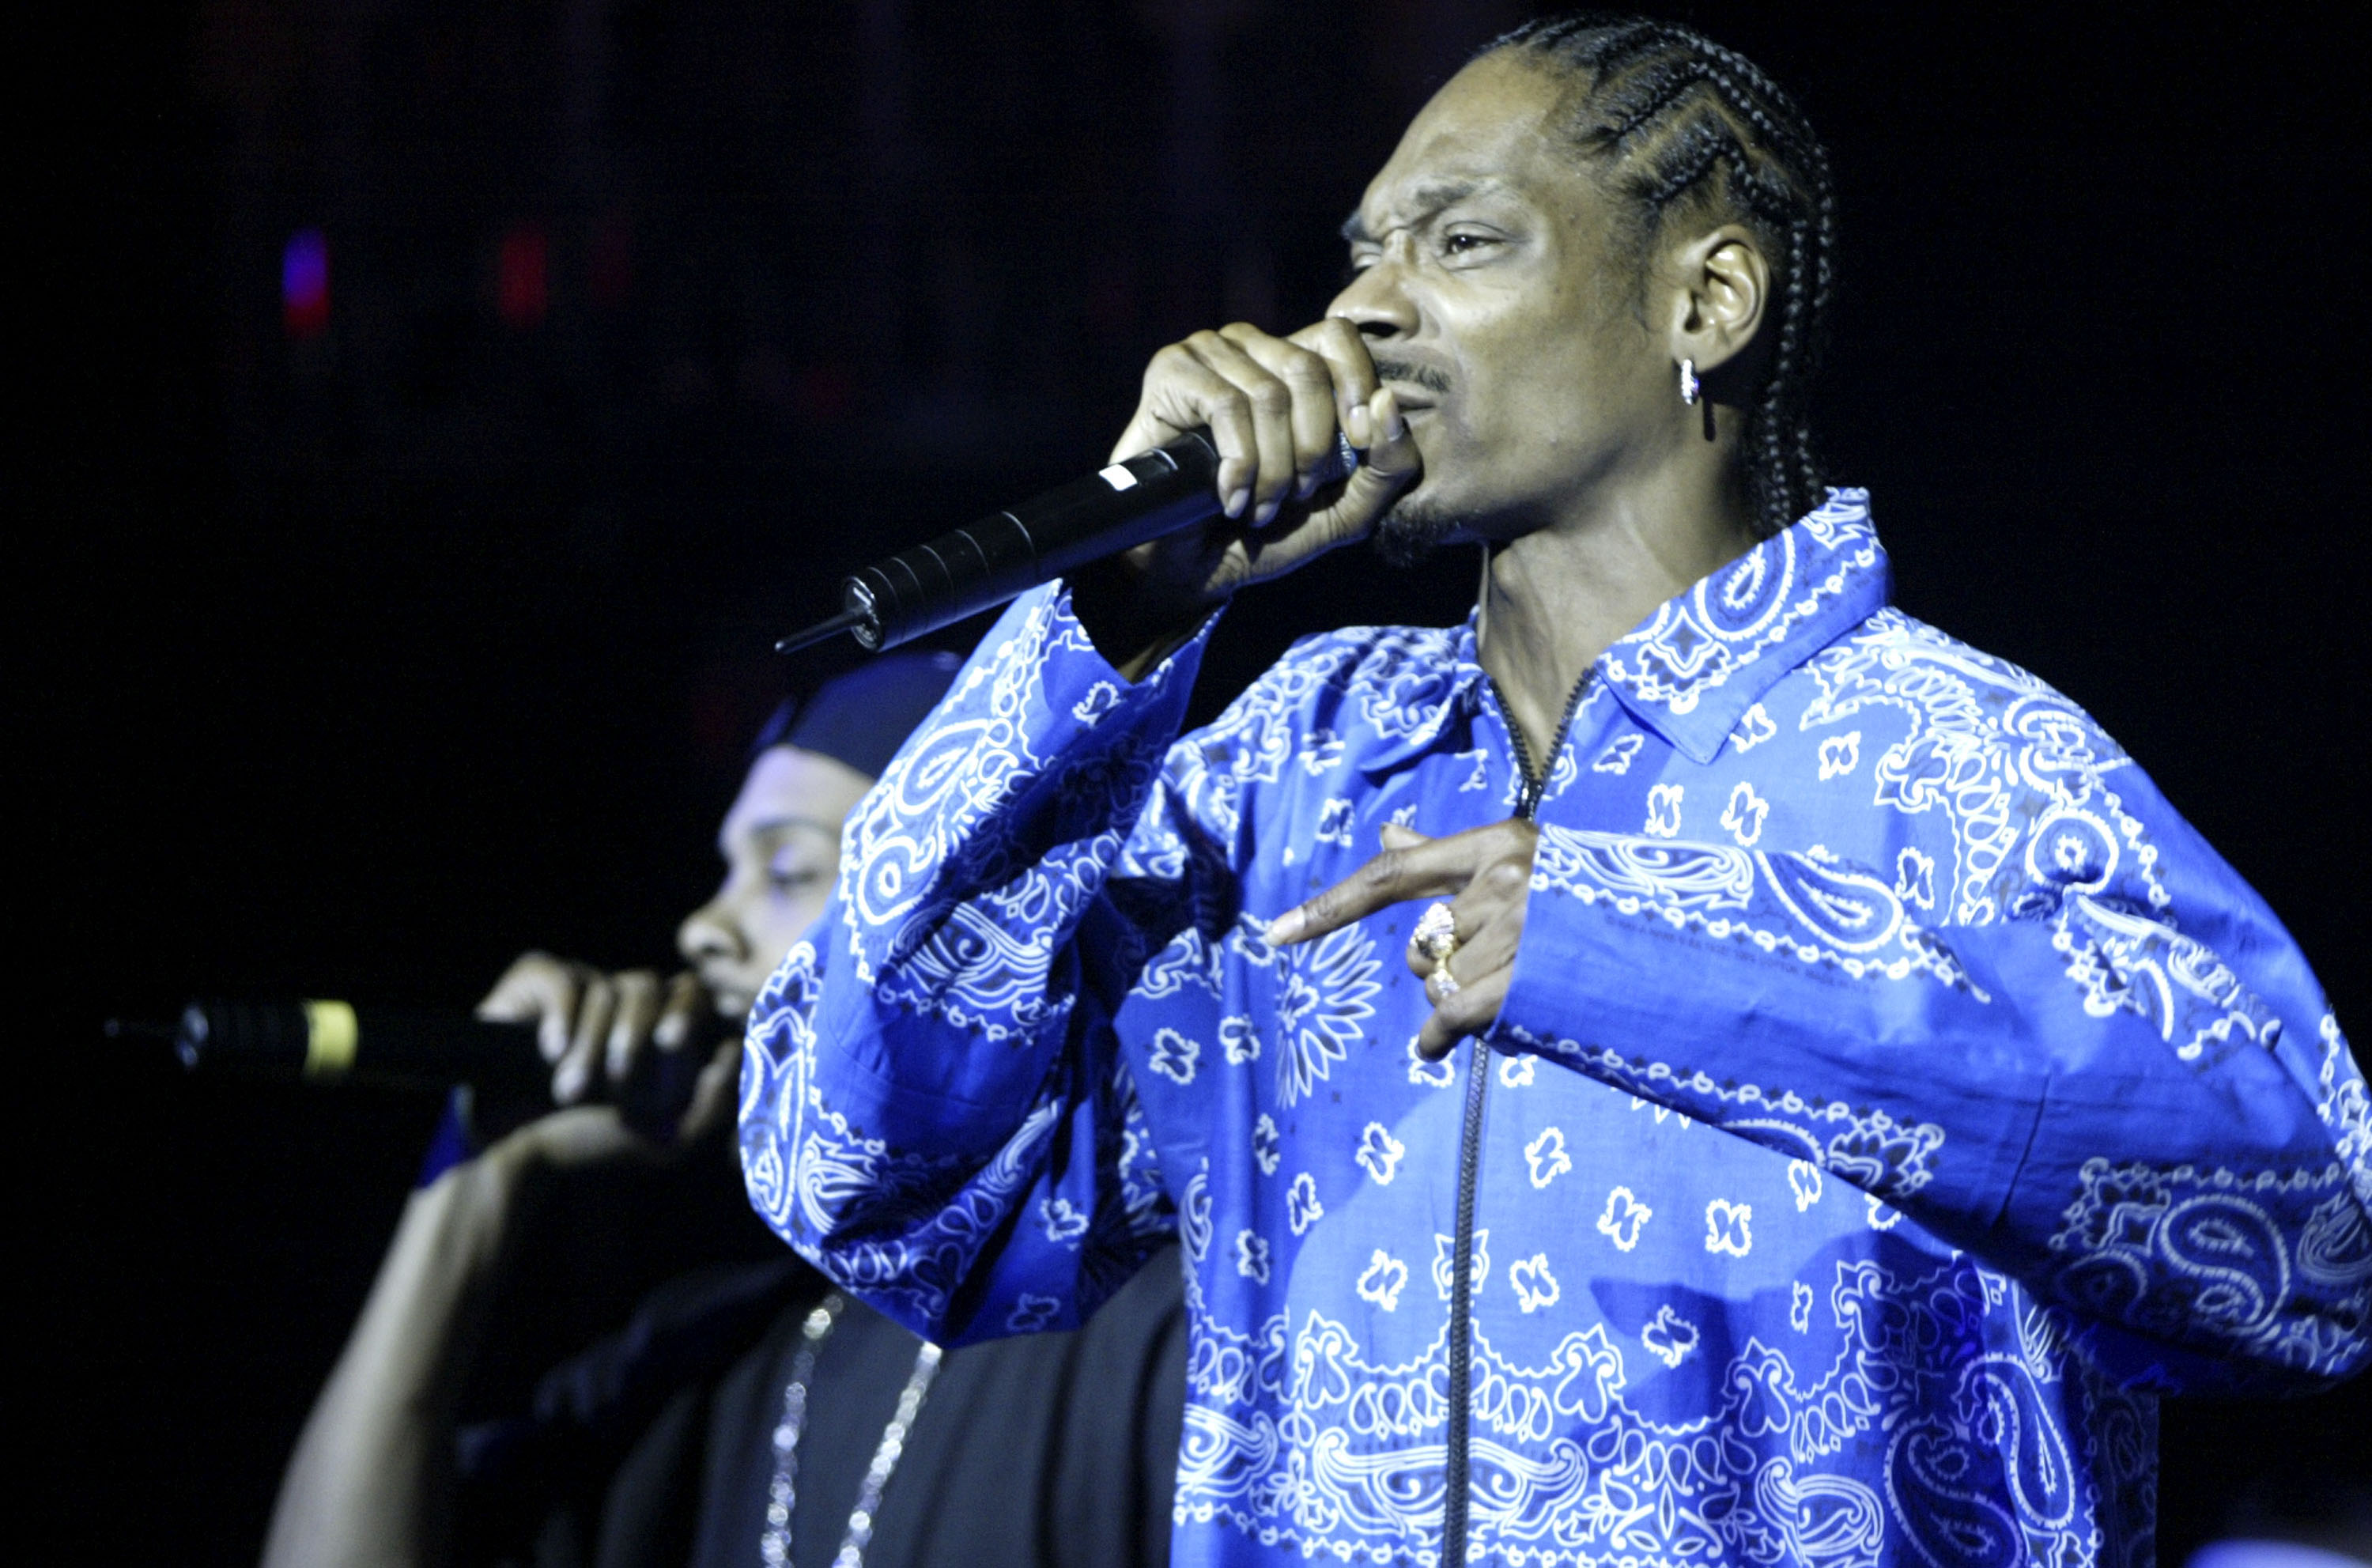 Snoop Dogg Refused To Let Pharrell 'Out-Rap' Him On His Own Song